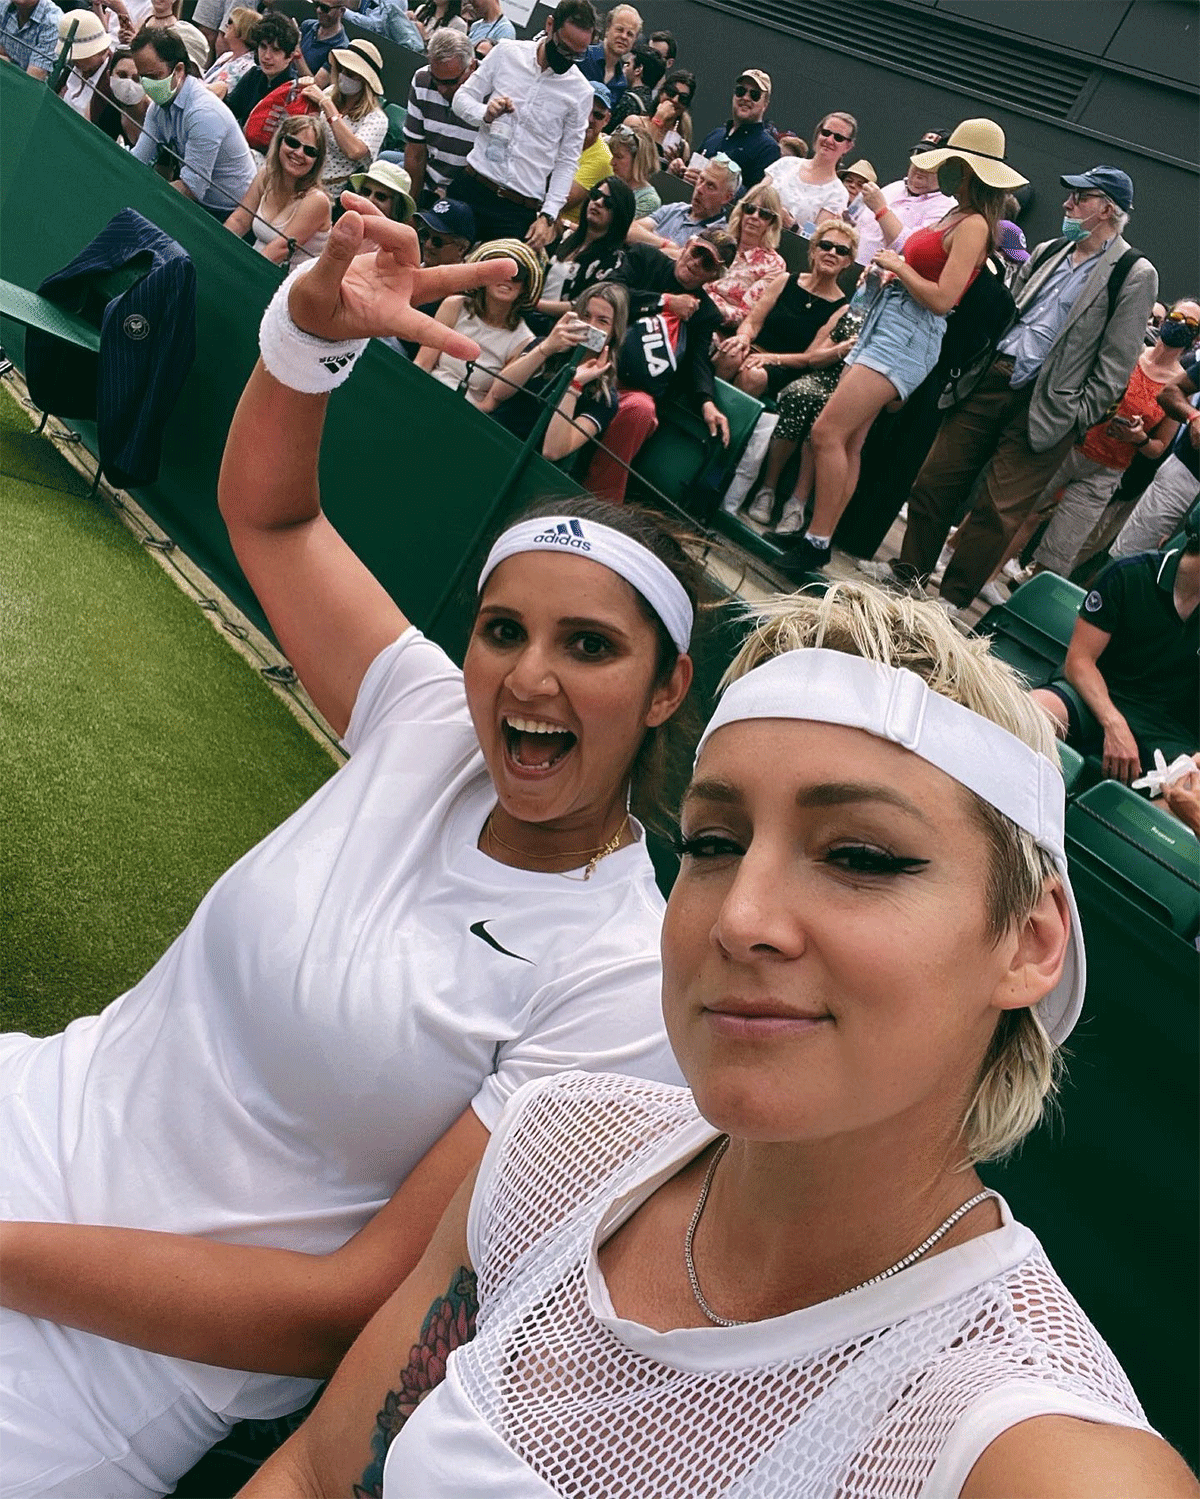 Sania Mirza and Bethanie Mattek-Sands celebrates their first round win on Thursday